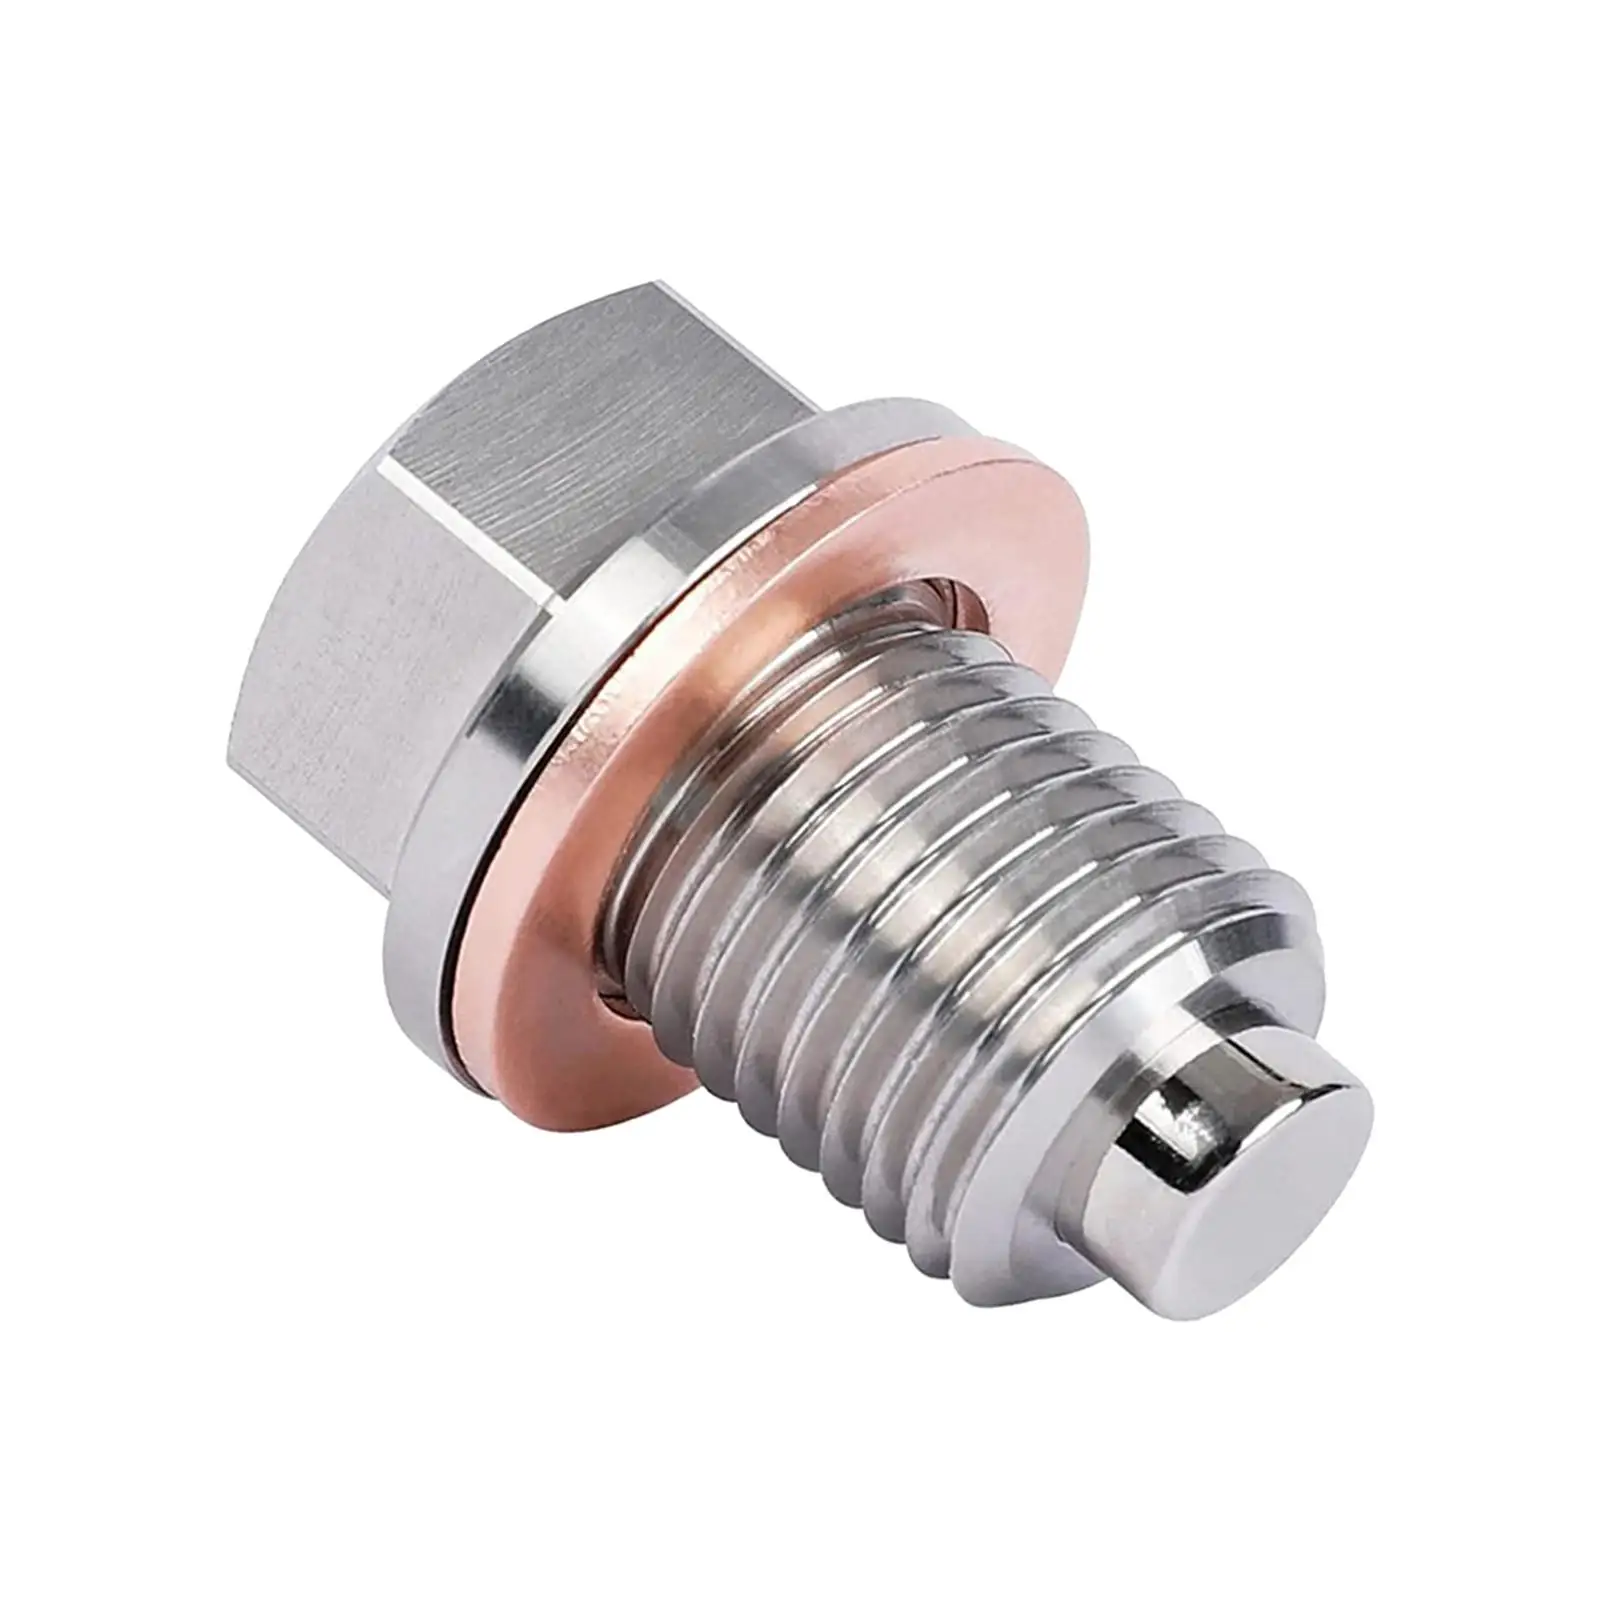 Oil Drain Plug Screw M12x1.5 Replace Accessory Easy to Install Sump Drain Nut